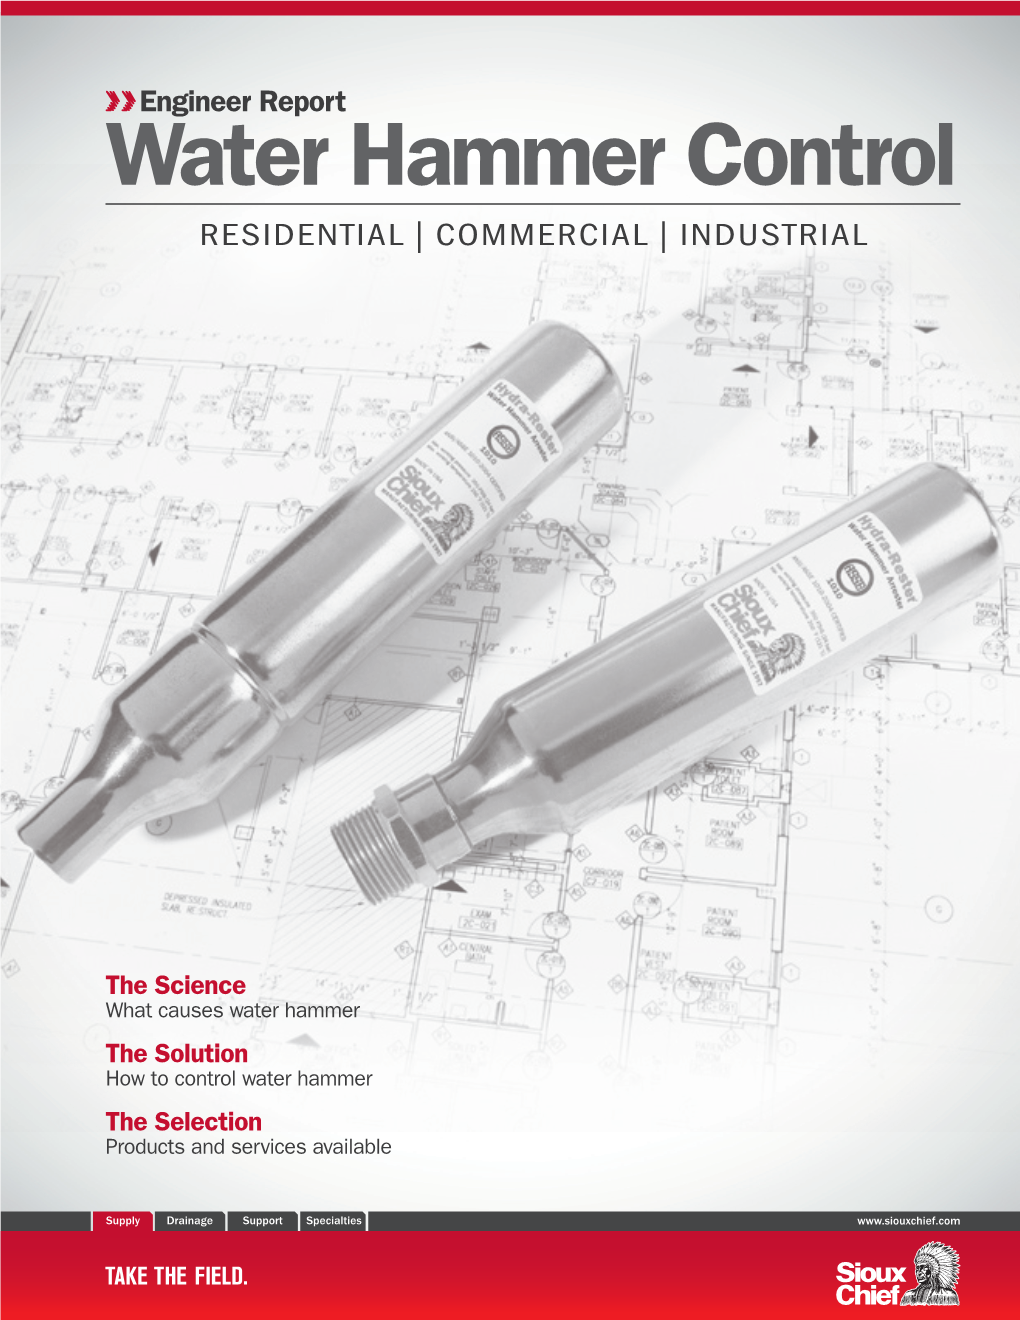 Engineer Report Water Hammer Control RESIDENTIAL|COMMERCIAL|INDUSTRIAL